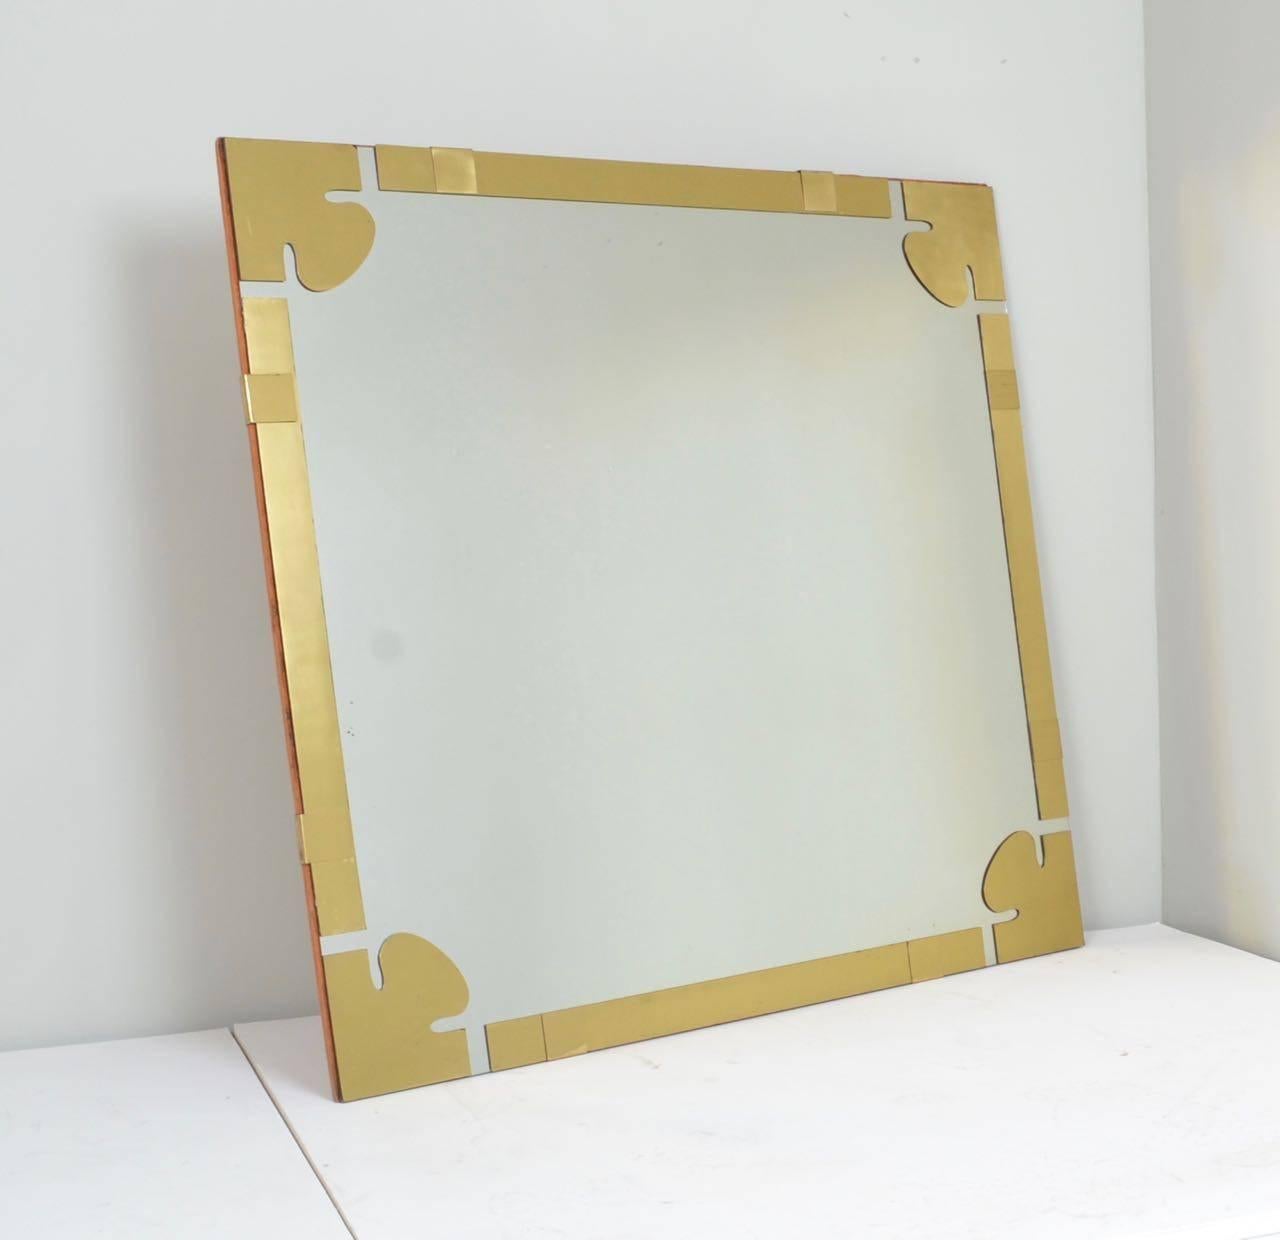 Sculptural lacquered brass pieces applied to the mirror with
an original felt covered backing.